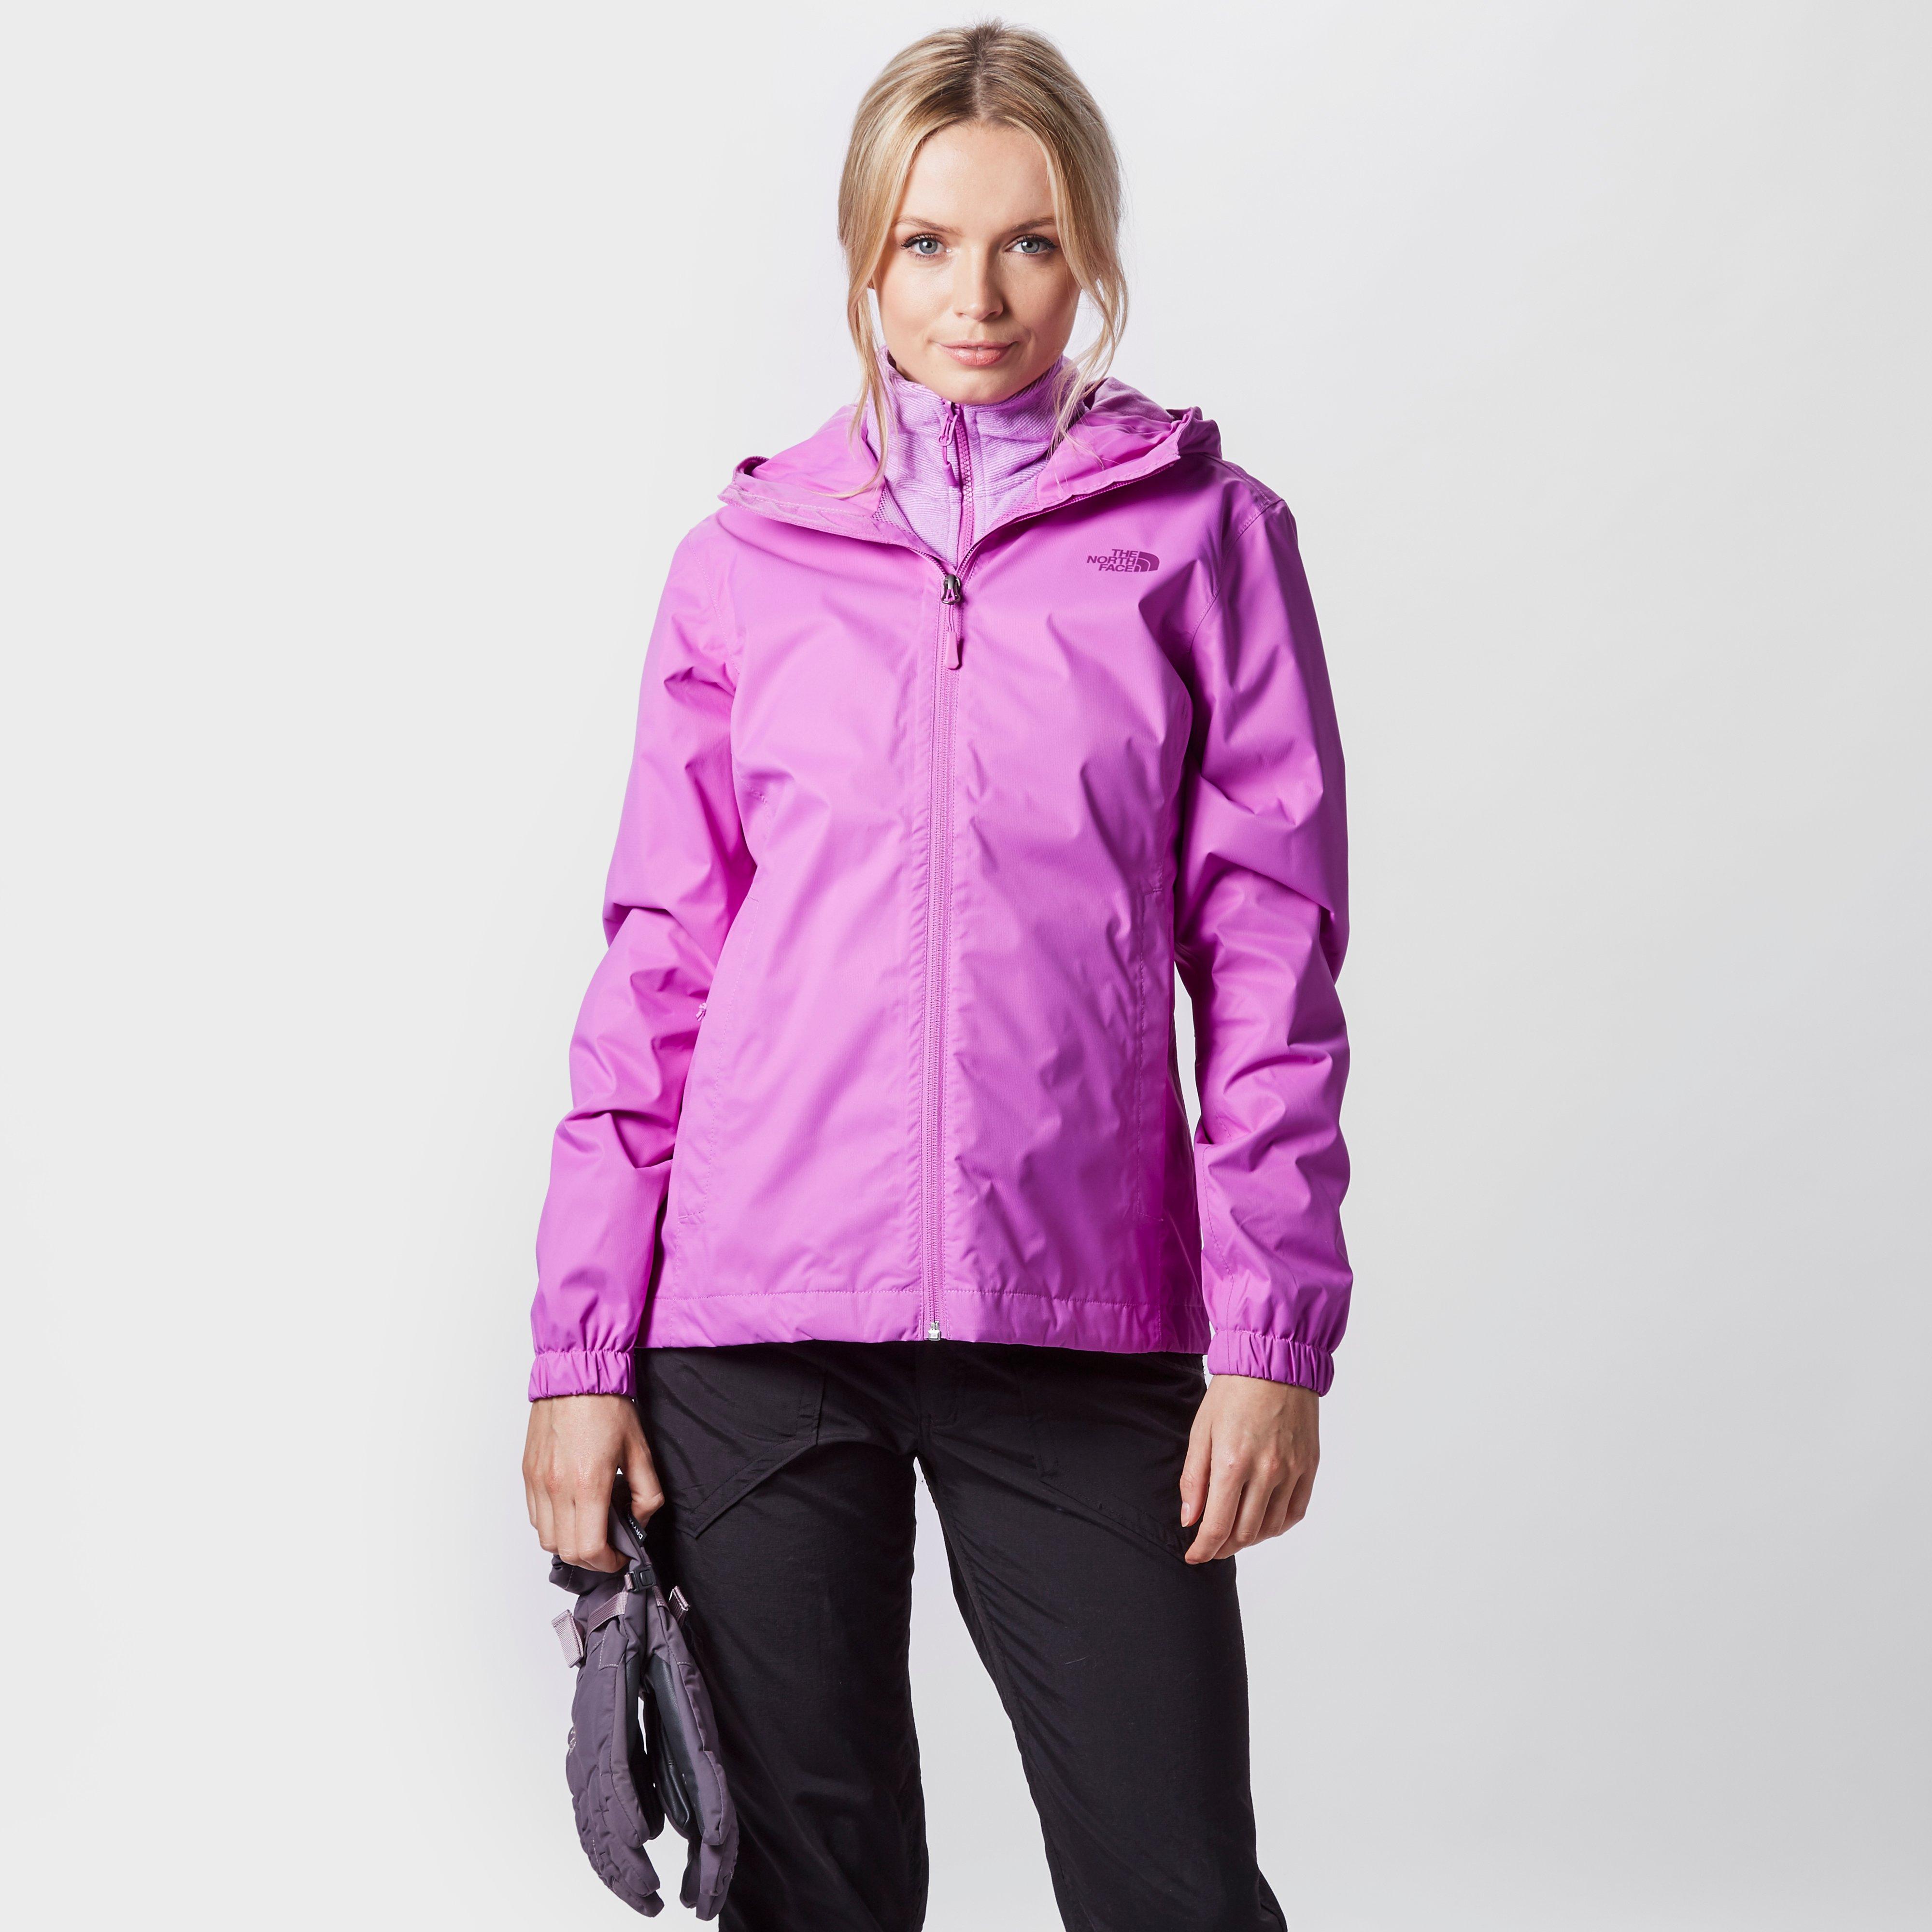 north face women's quest jacket review